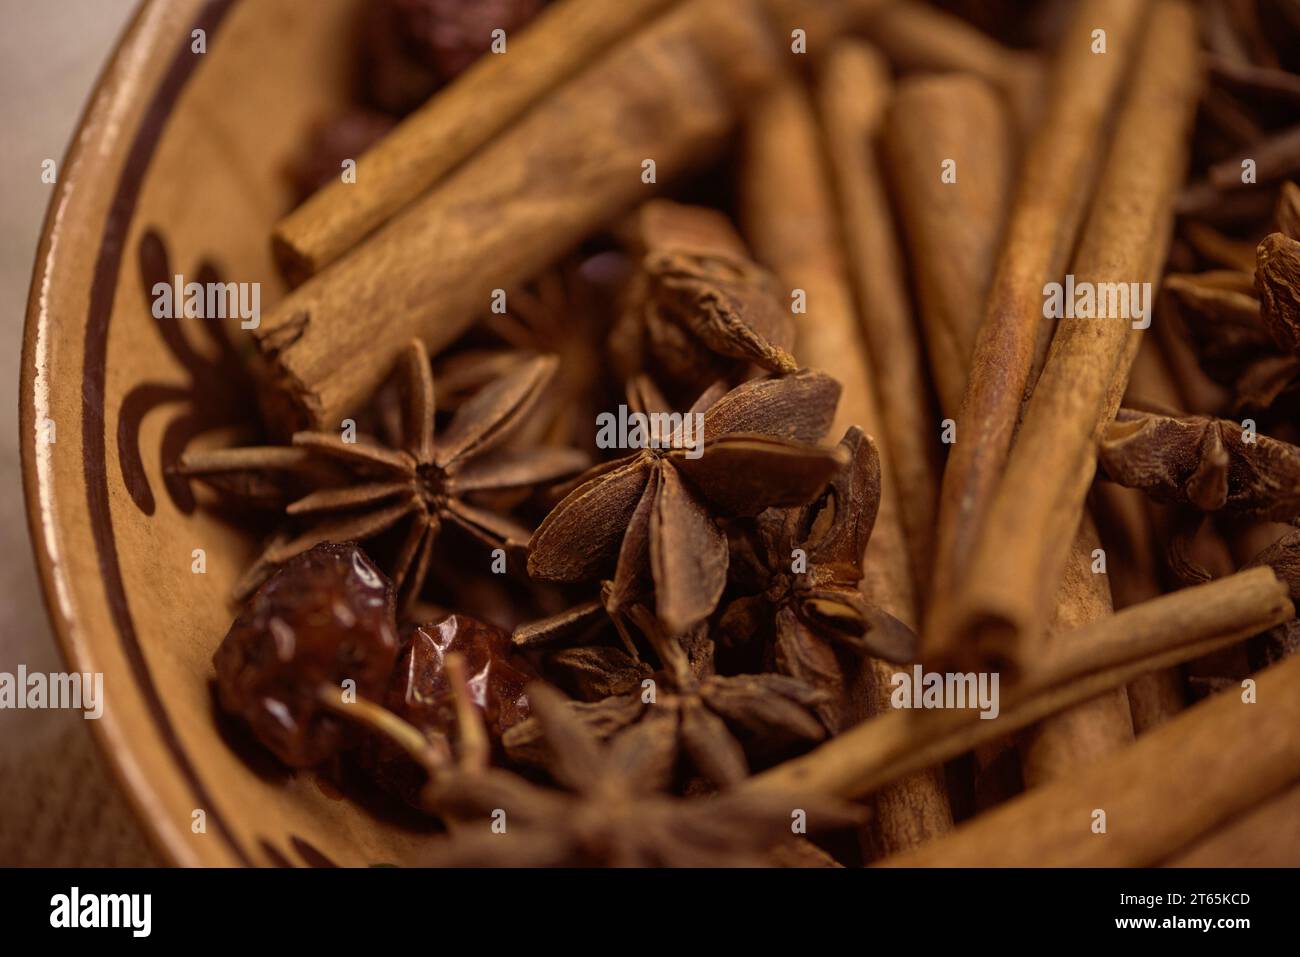 a patterned ceramic bowl filled with whole cinnamon sticks and clove flowers. A mixture for preparing mulled wine. Autumn mood Stock Photo